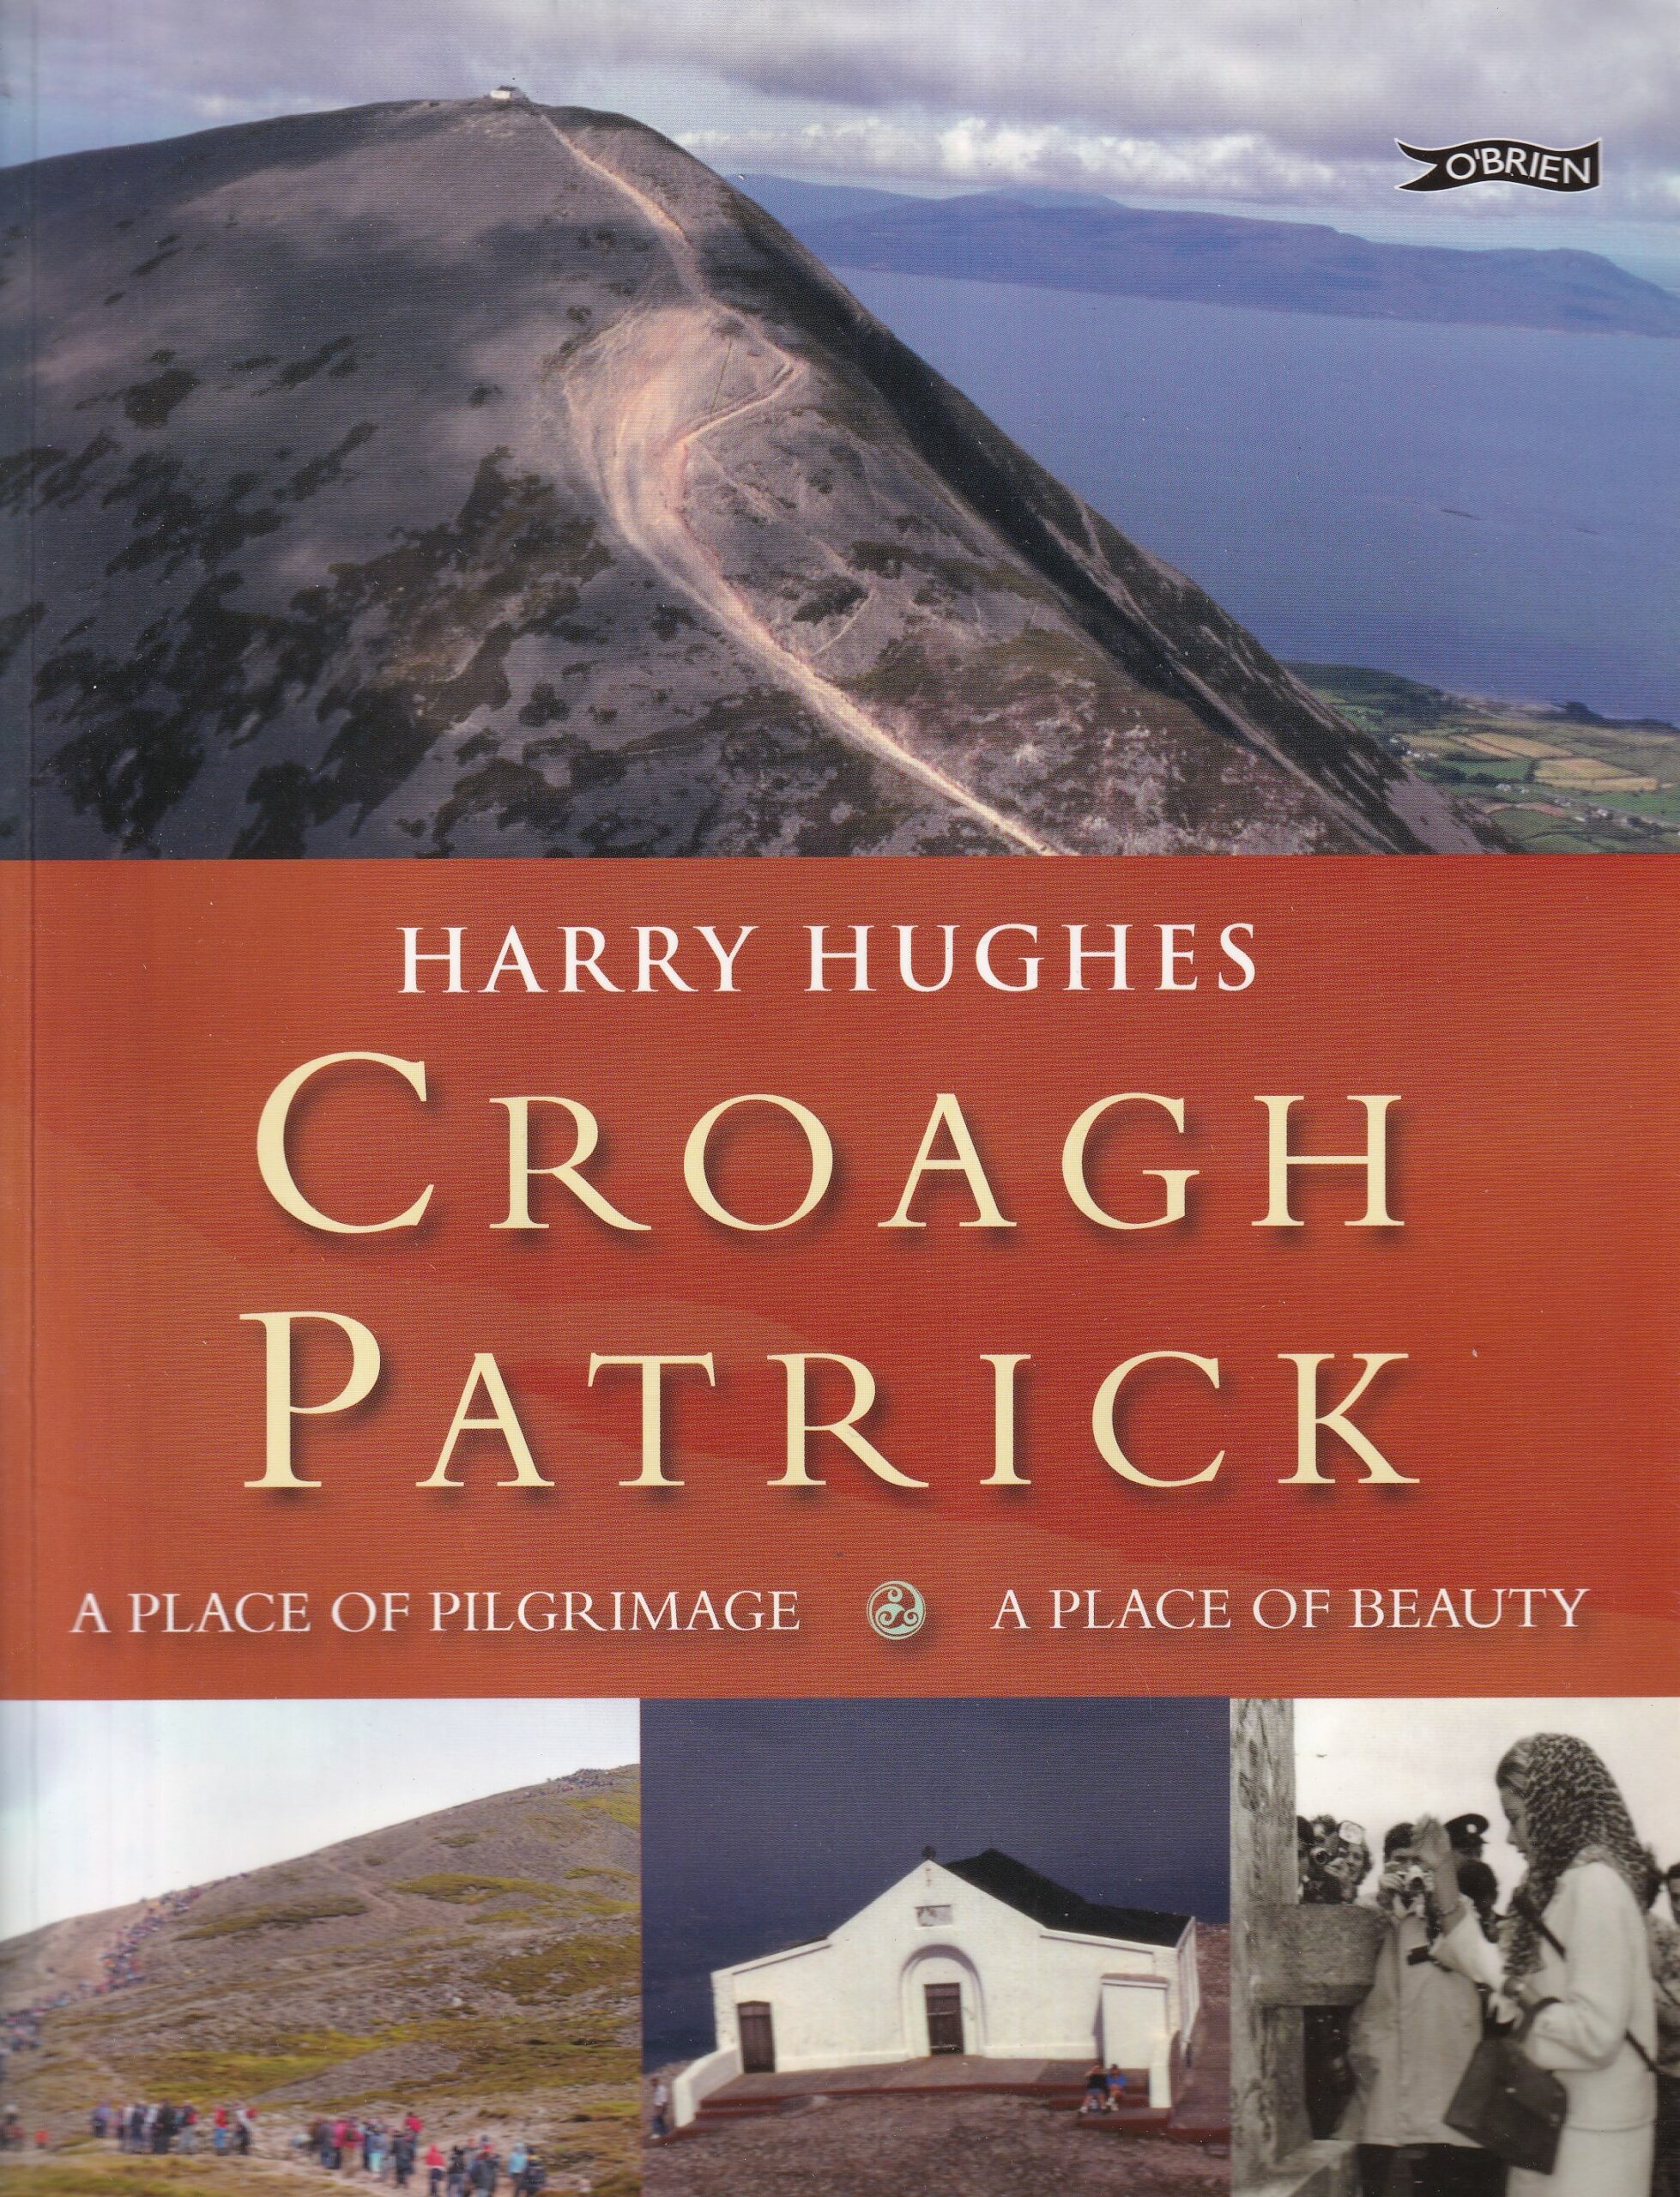 Croagh Patrick: A Place of Pilgrimage. A Place of Beauty by Harry Hughes